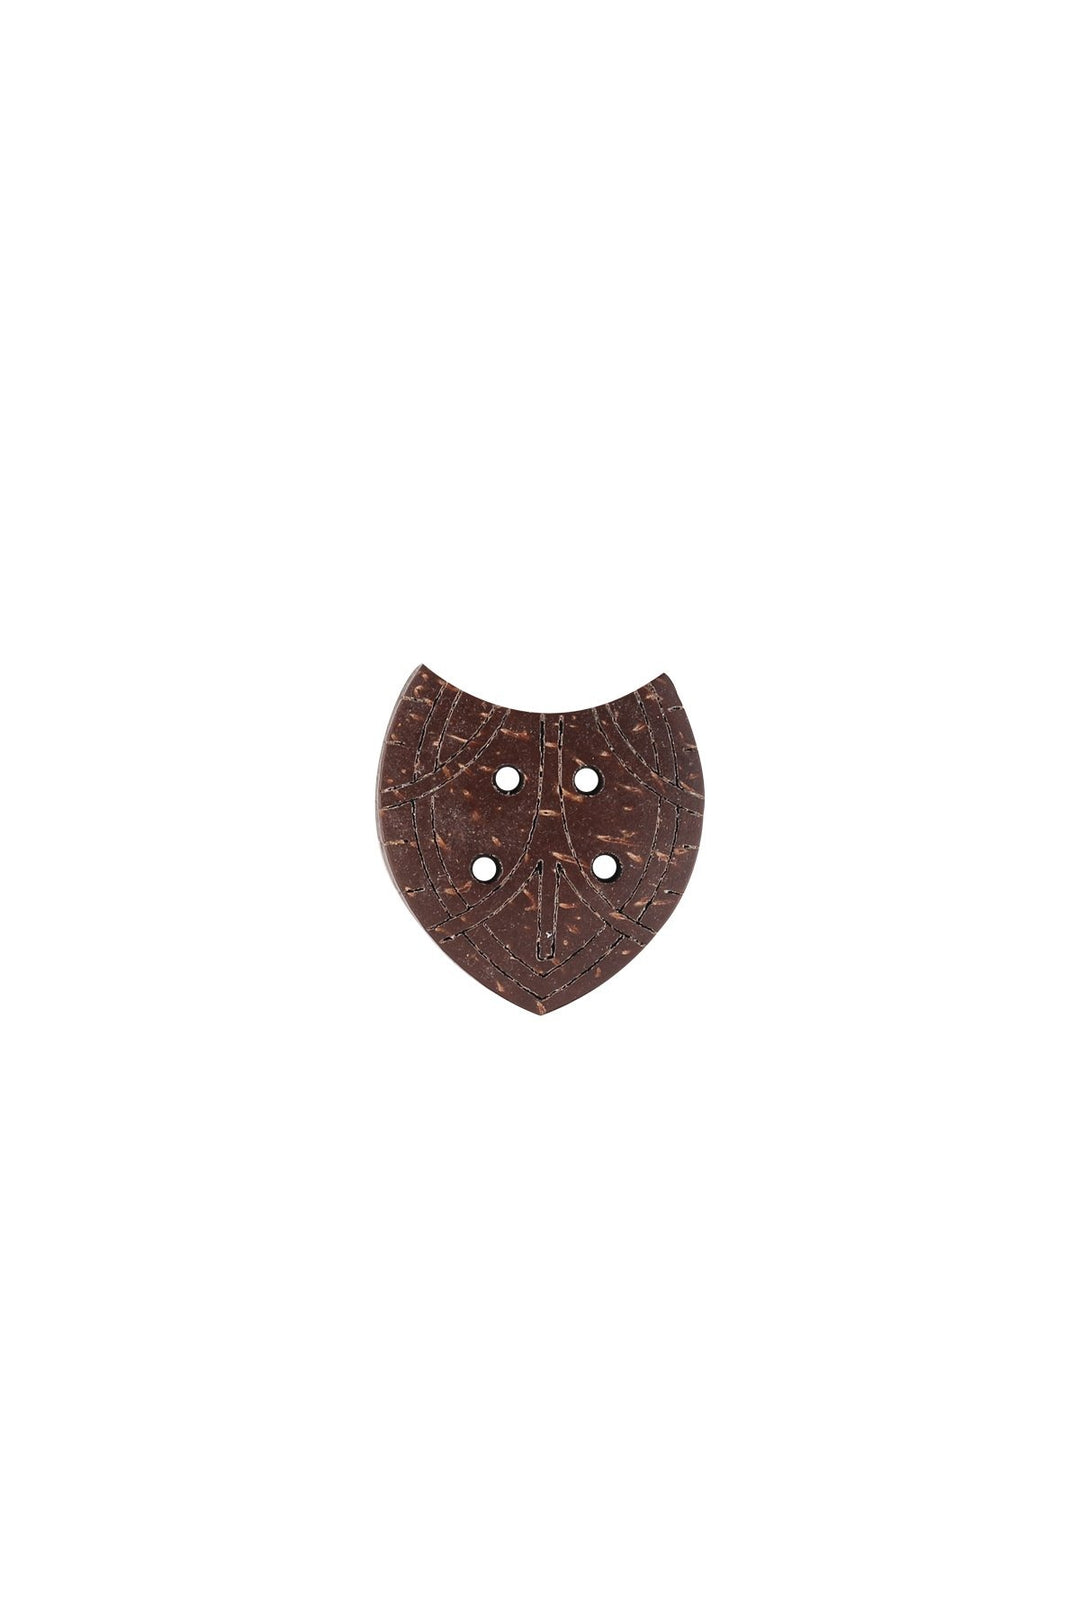 Classic Shield Shape 4-Hole Brown Coco Buttons